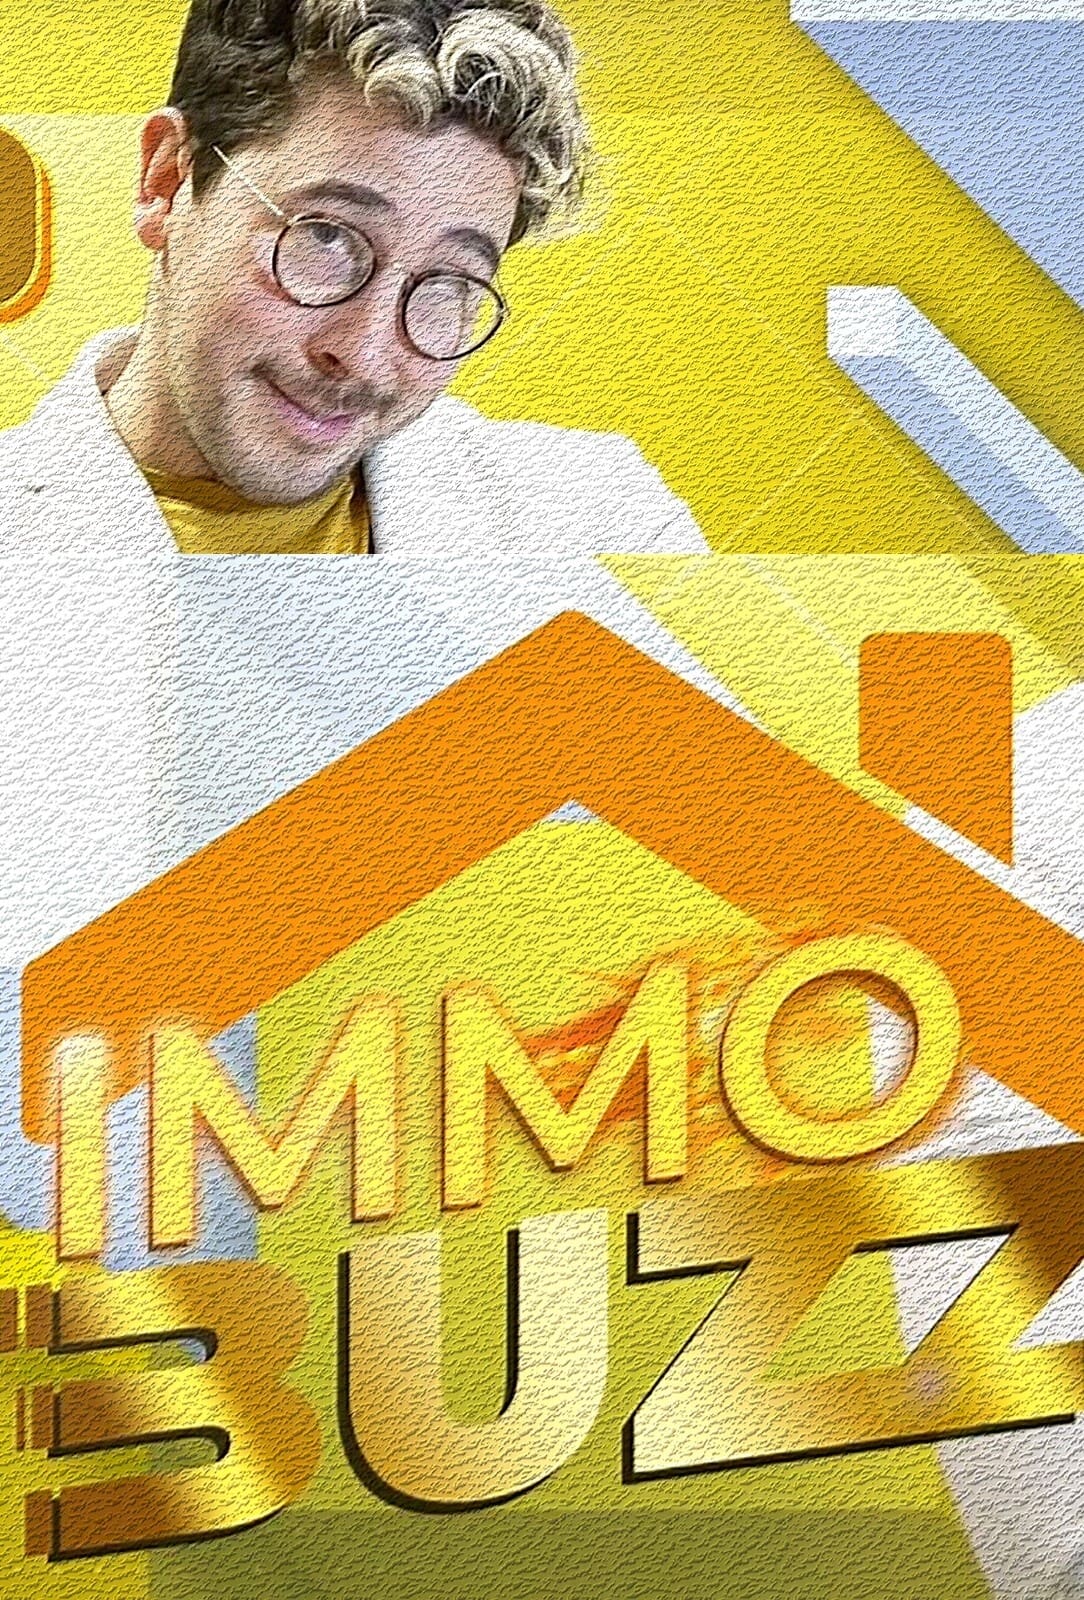 Immo Buzz